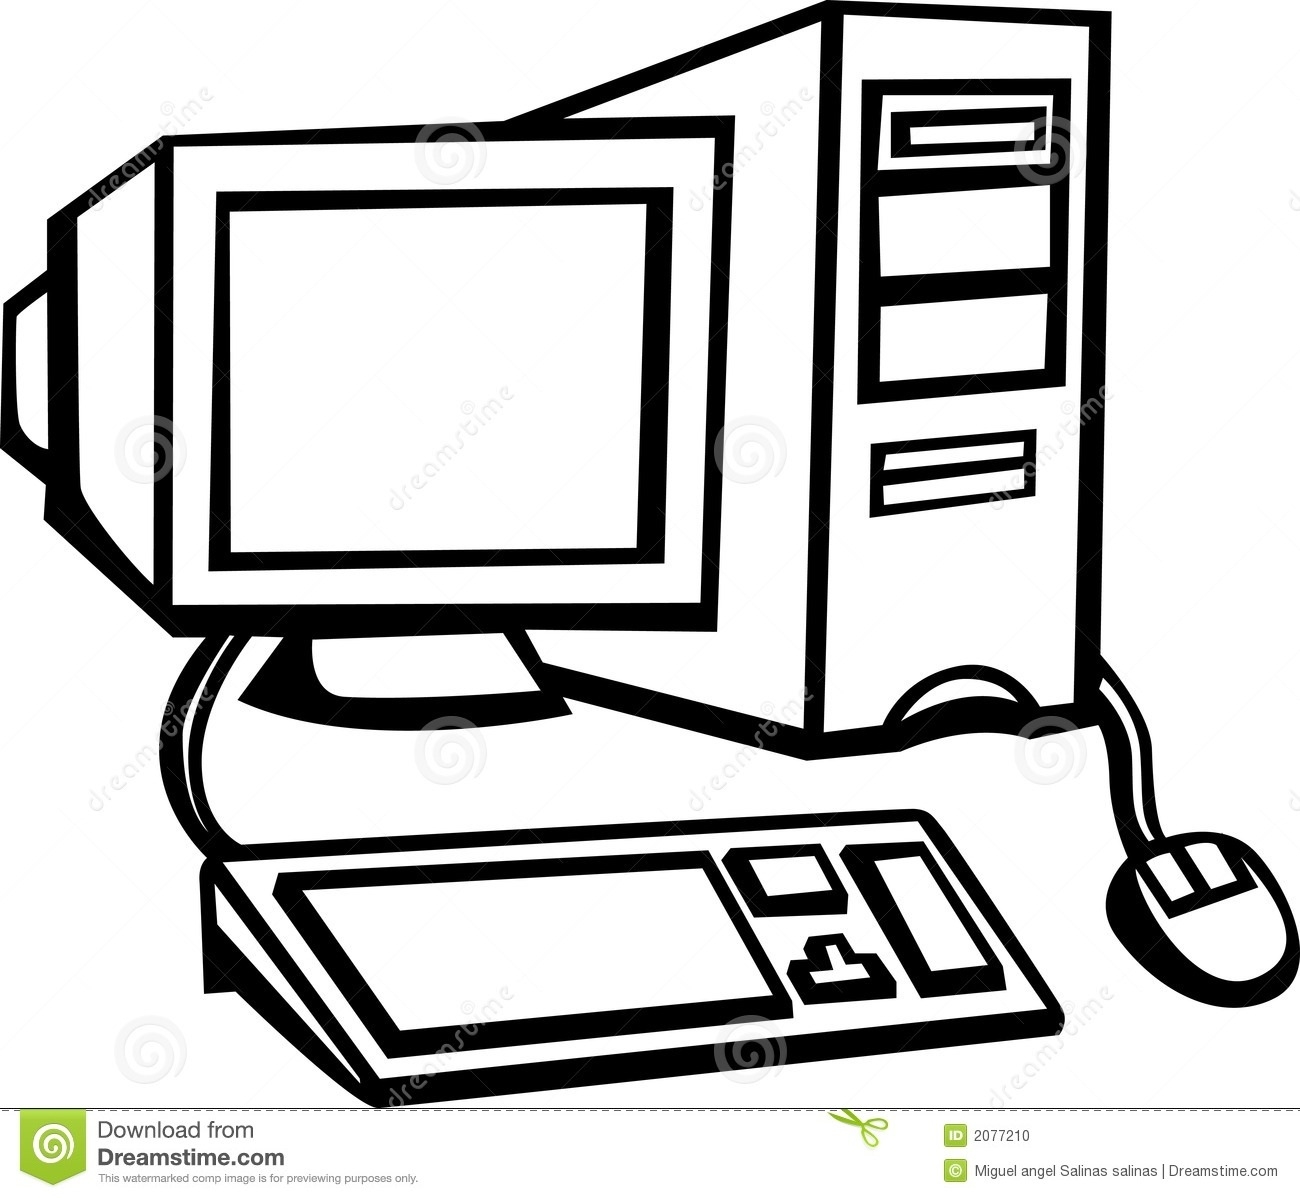 Computer clipart black and white Awesome Desktop puter